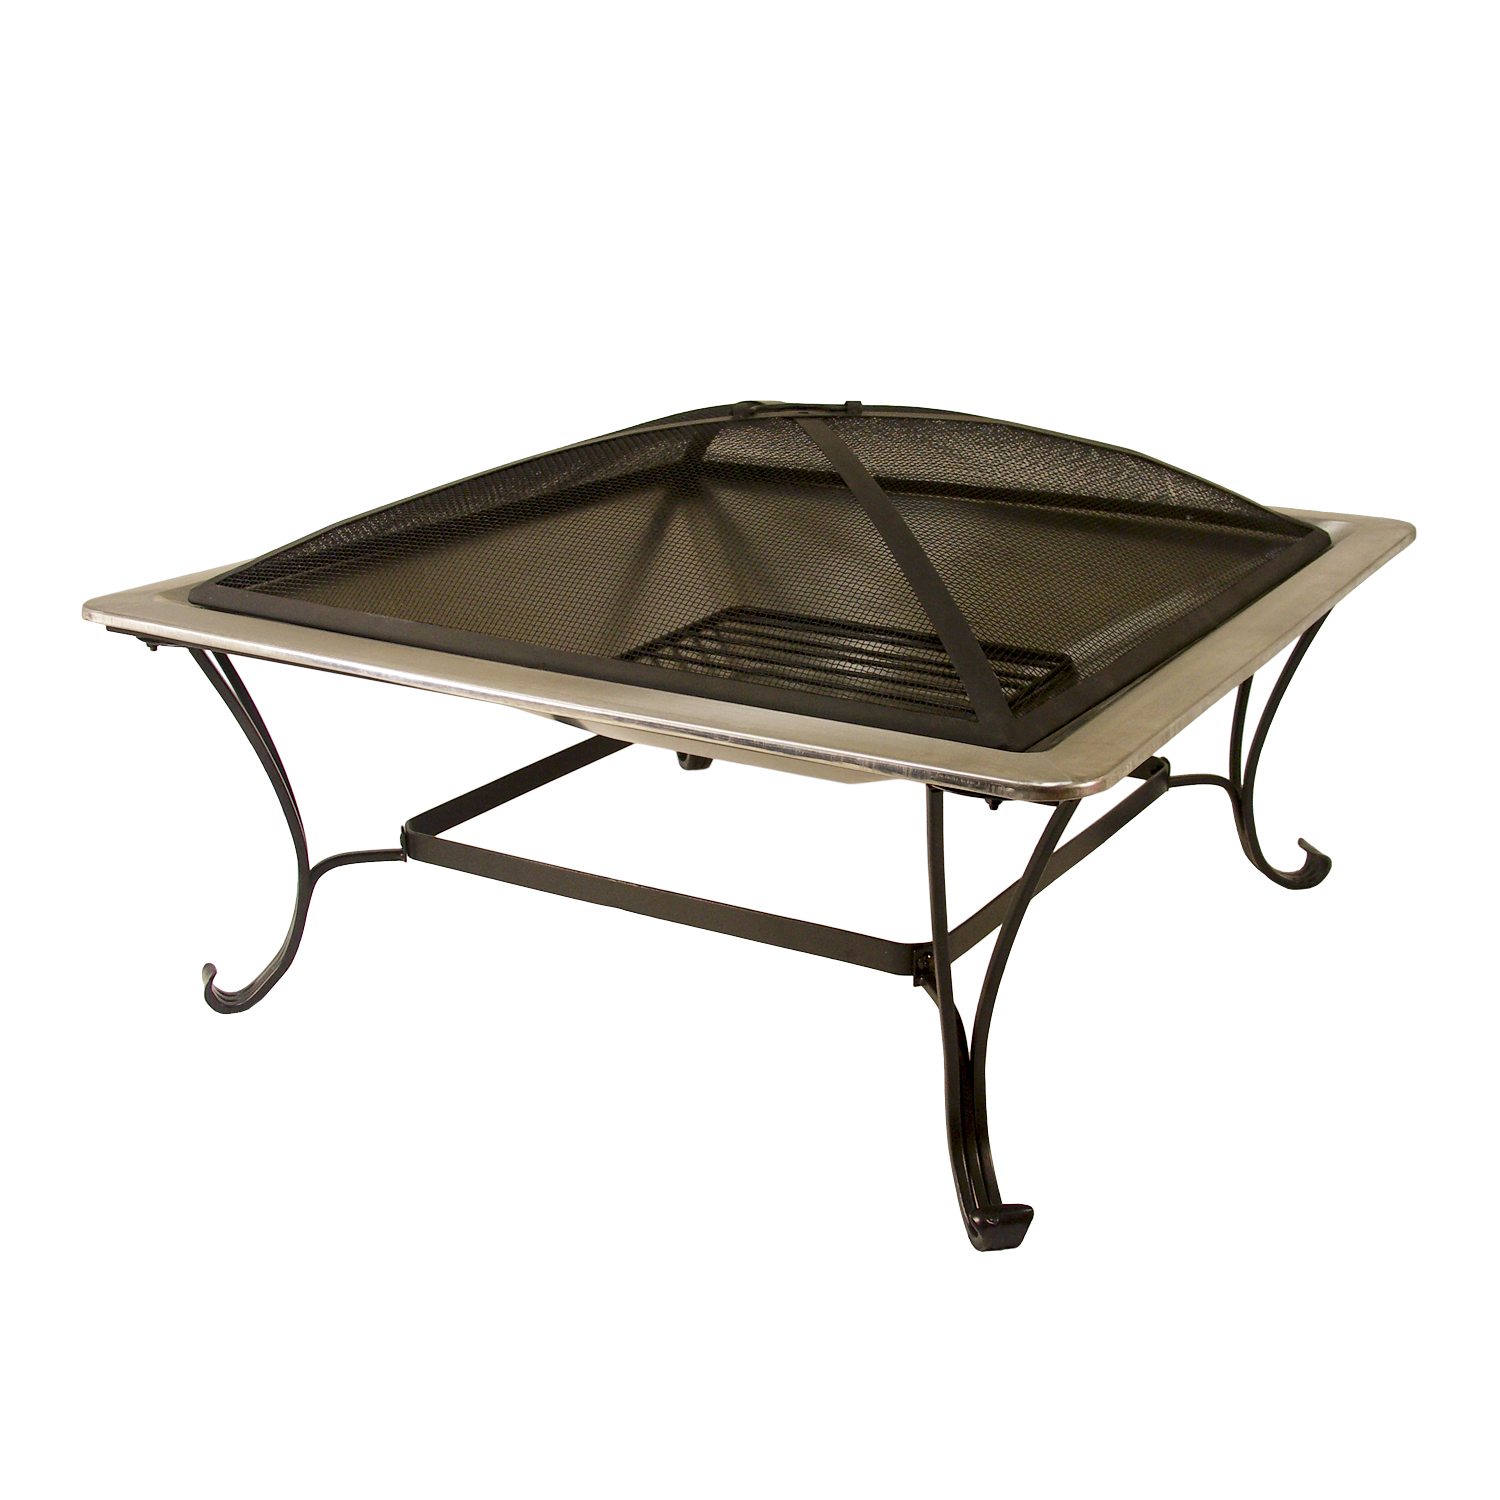 33-inch Square Stainless Steel Fire Bowl Set